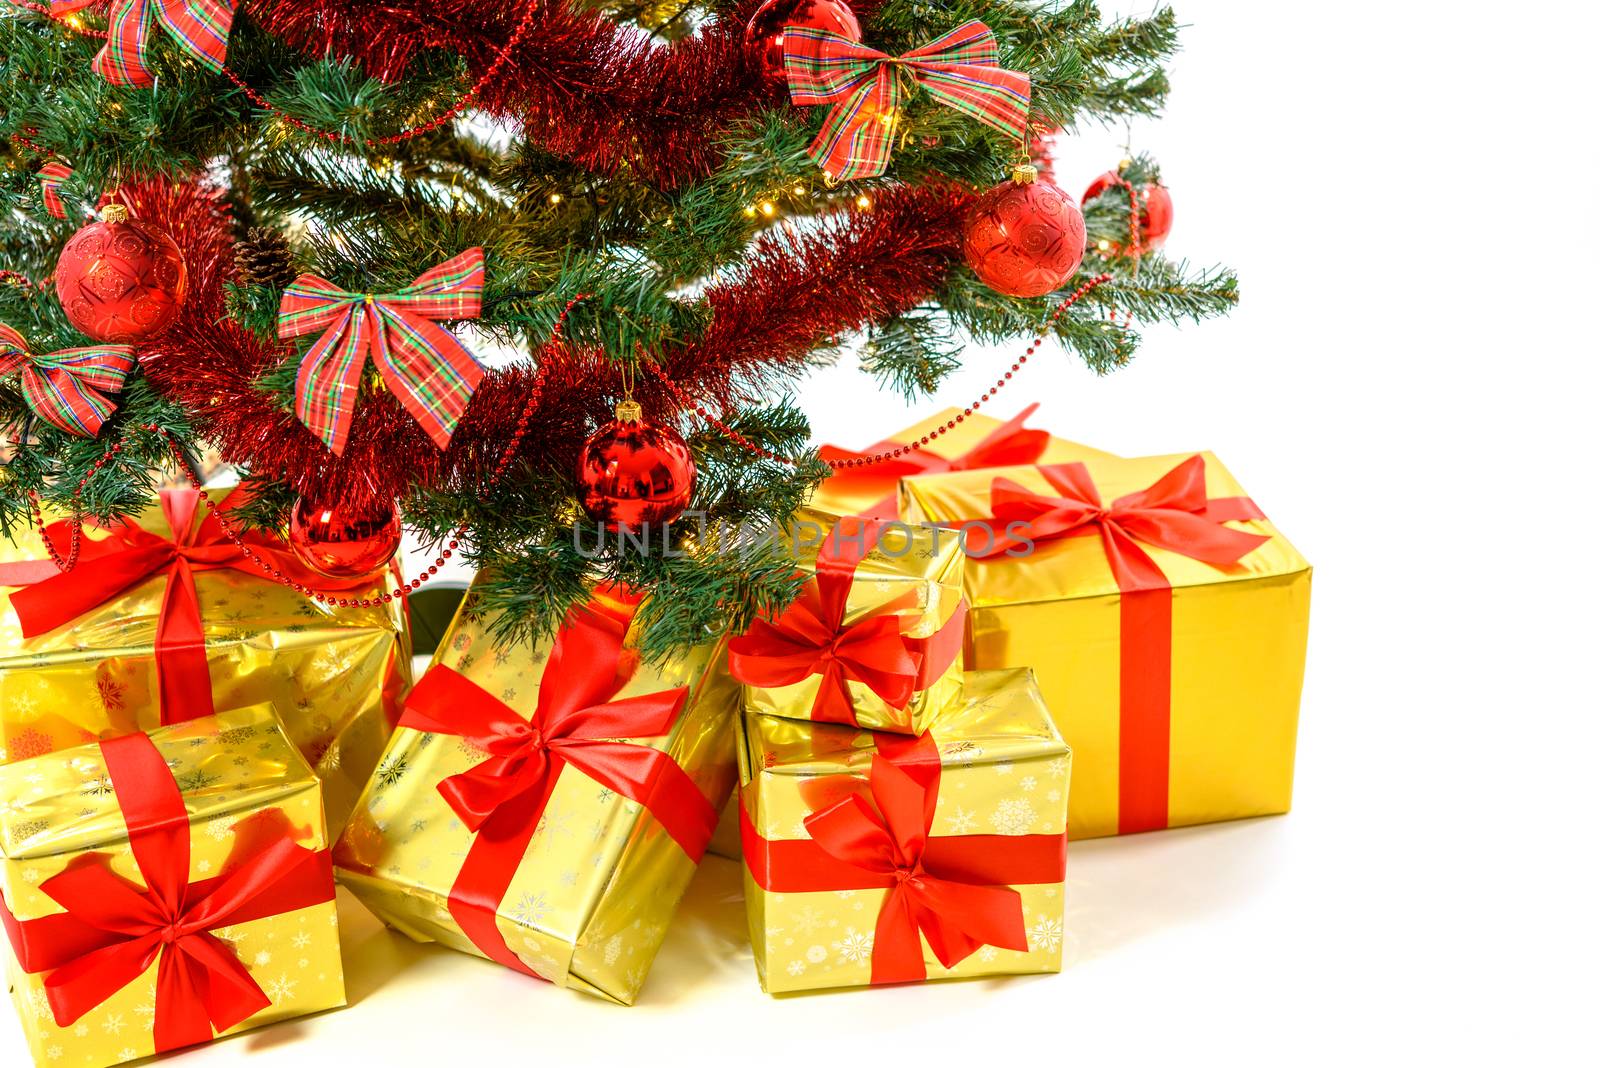 Luxury gifts under Christmas tree by wdnet_studio